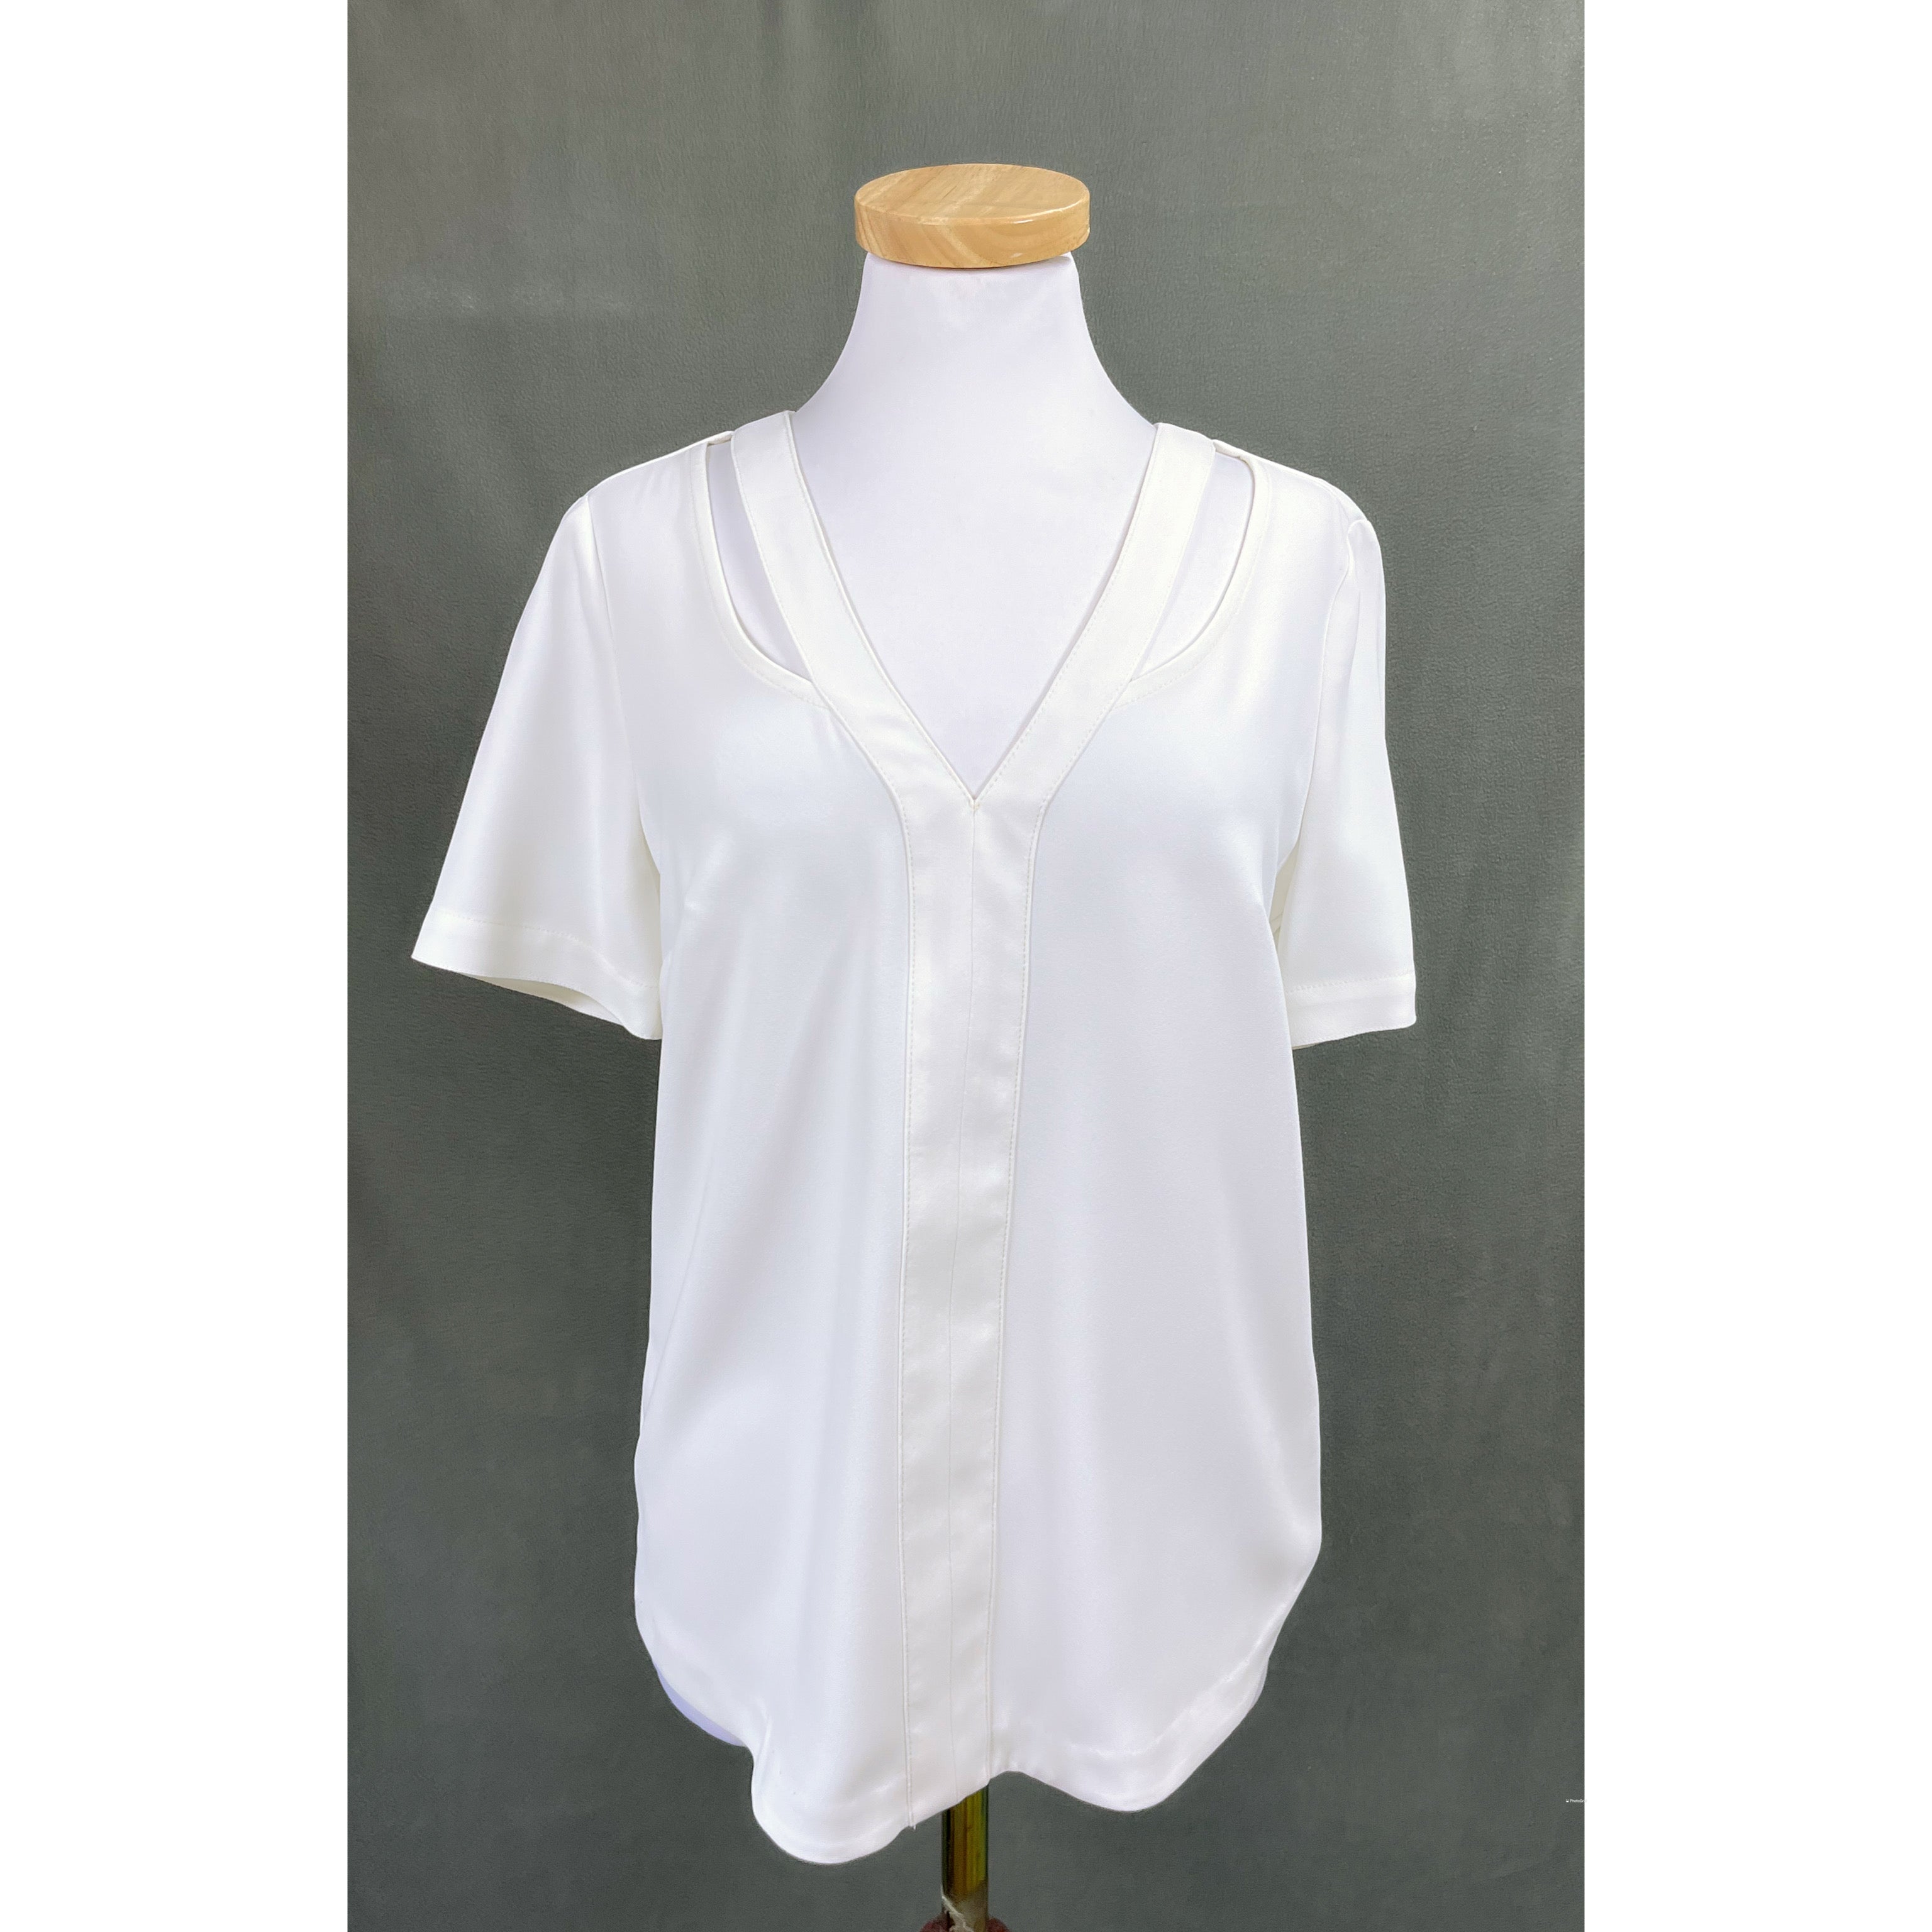 Trina Turk white blouse, size S, NEW WITH TAGS!